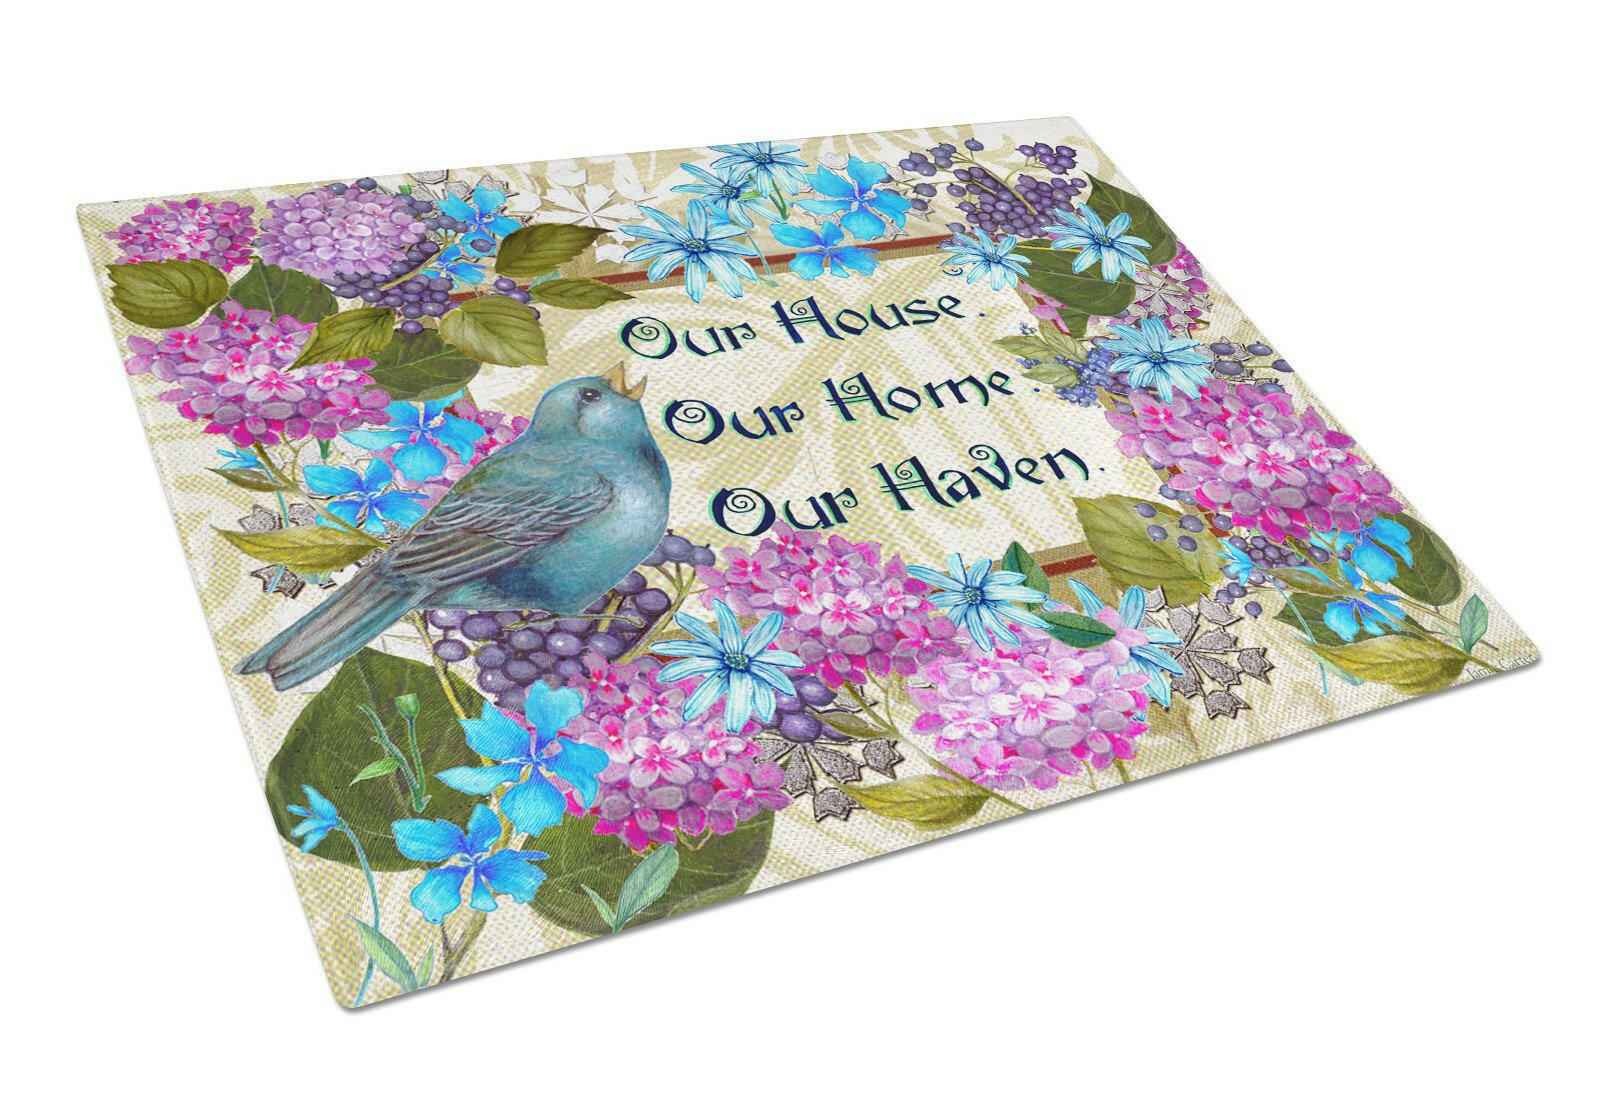 Our House Our Home Our Haven Glass Cutting Board Large PJC1102LCB by Caroline's Treasures